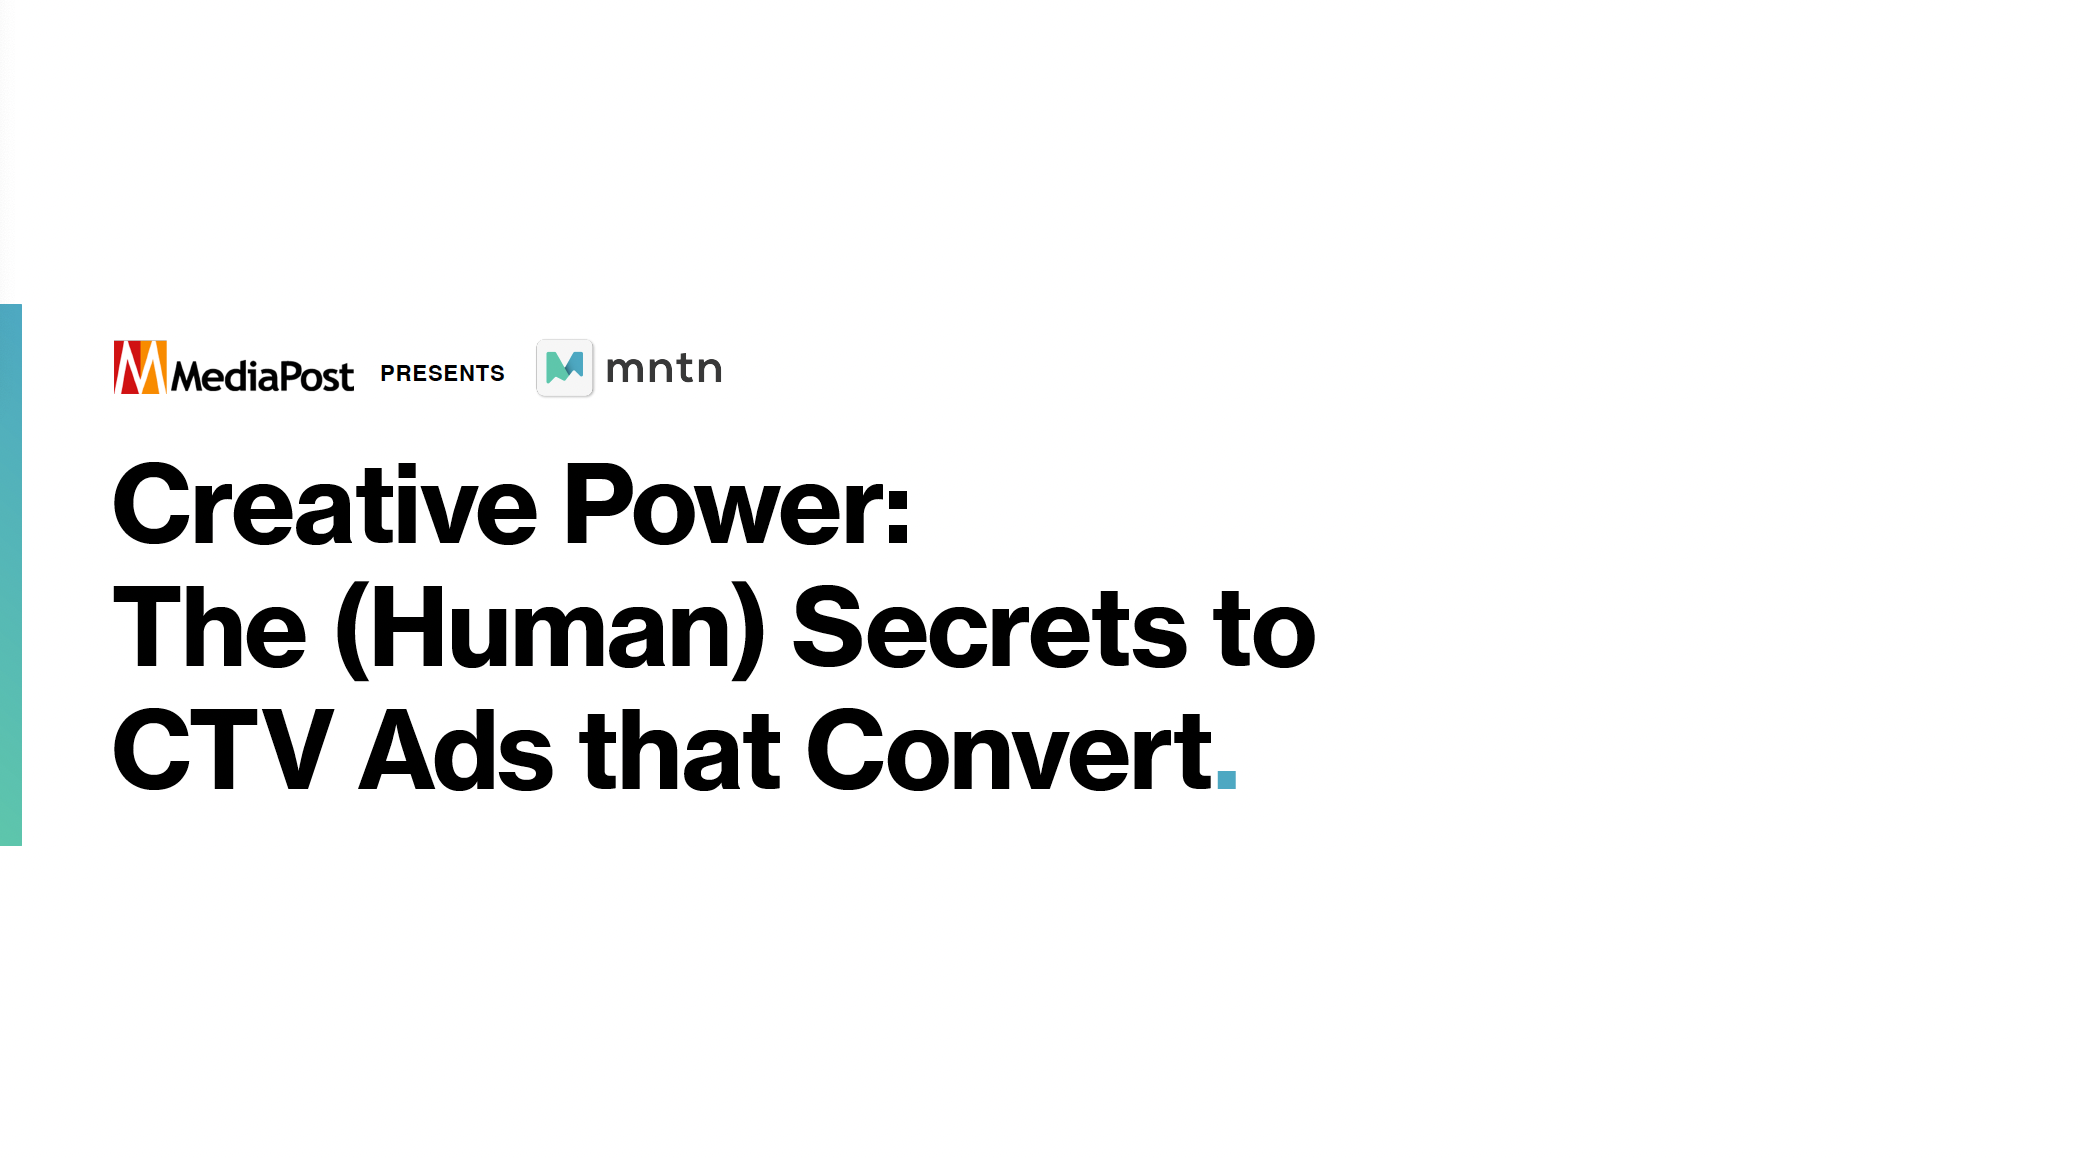 Creative Power: The (Human) Secrets to CTV Ads that Convert